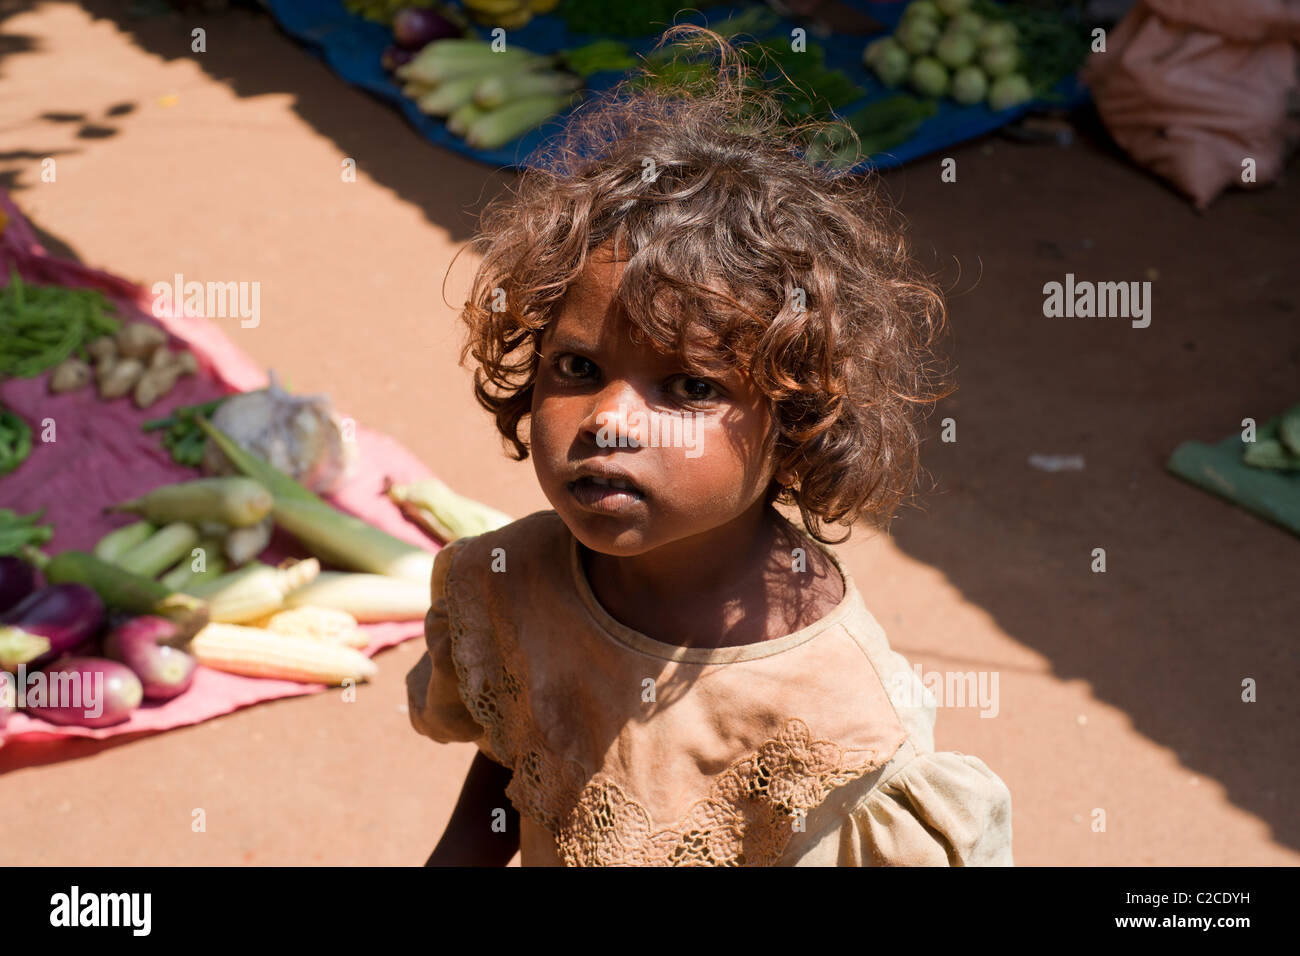 A young female child begging in Calangute food market, Goa, India Stock Photo